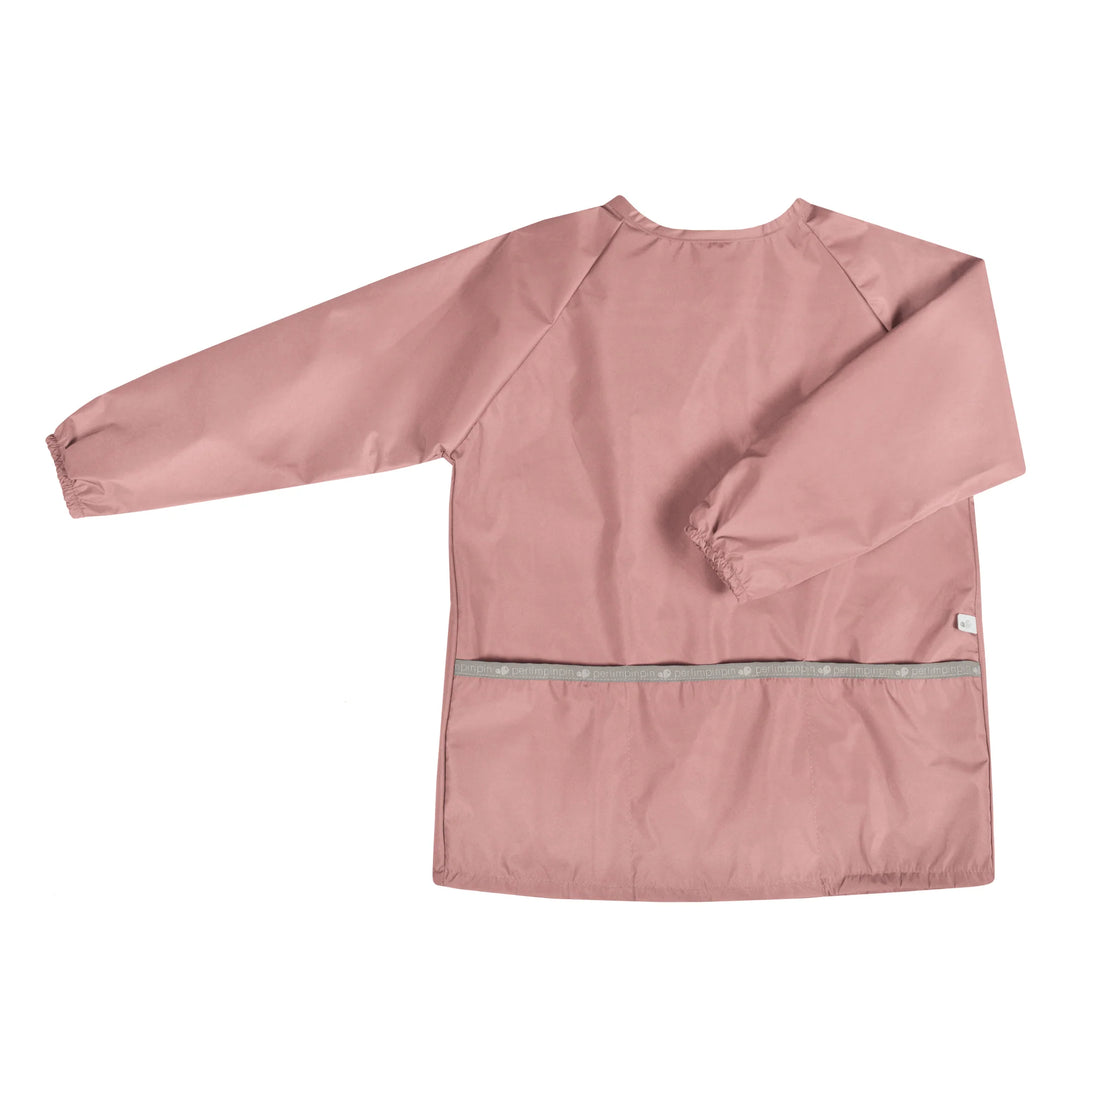 Omaiki Gusto Bib with sleeves 6 to 36 months